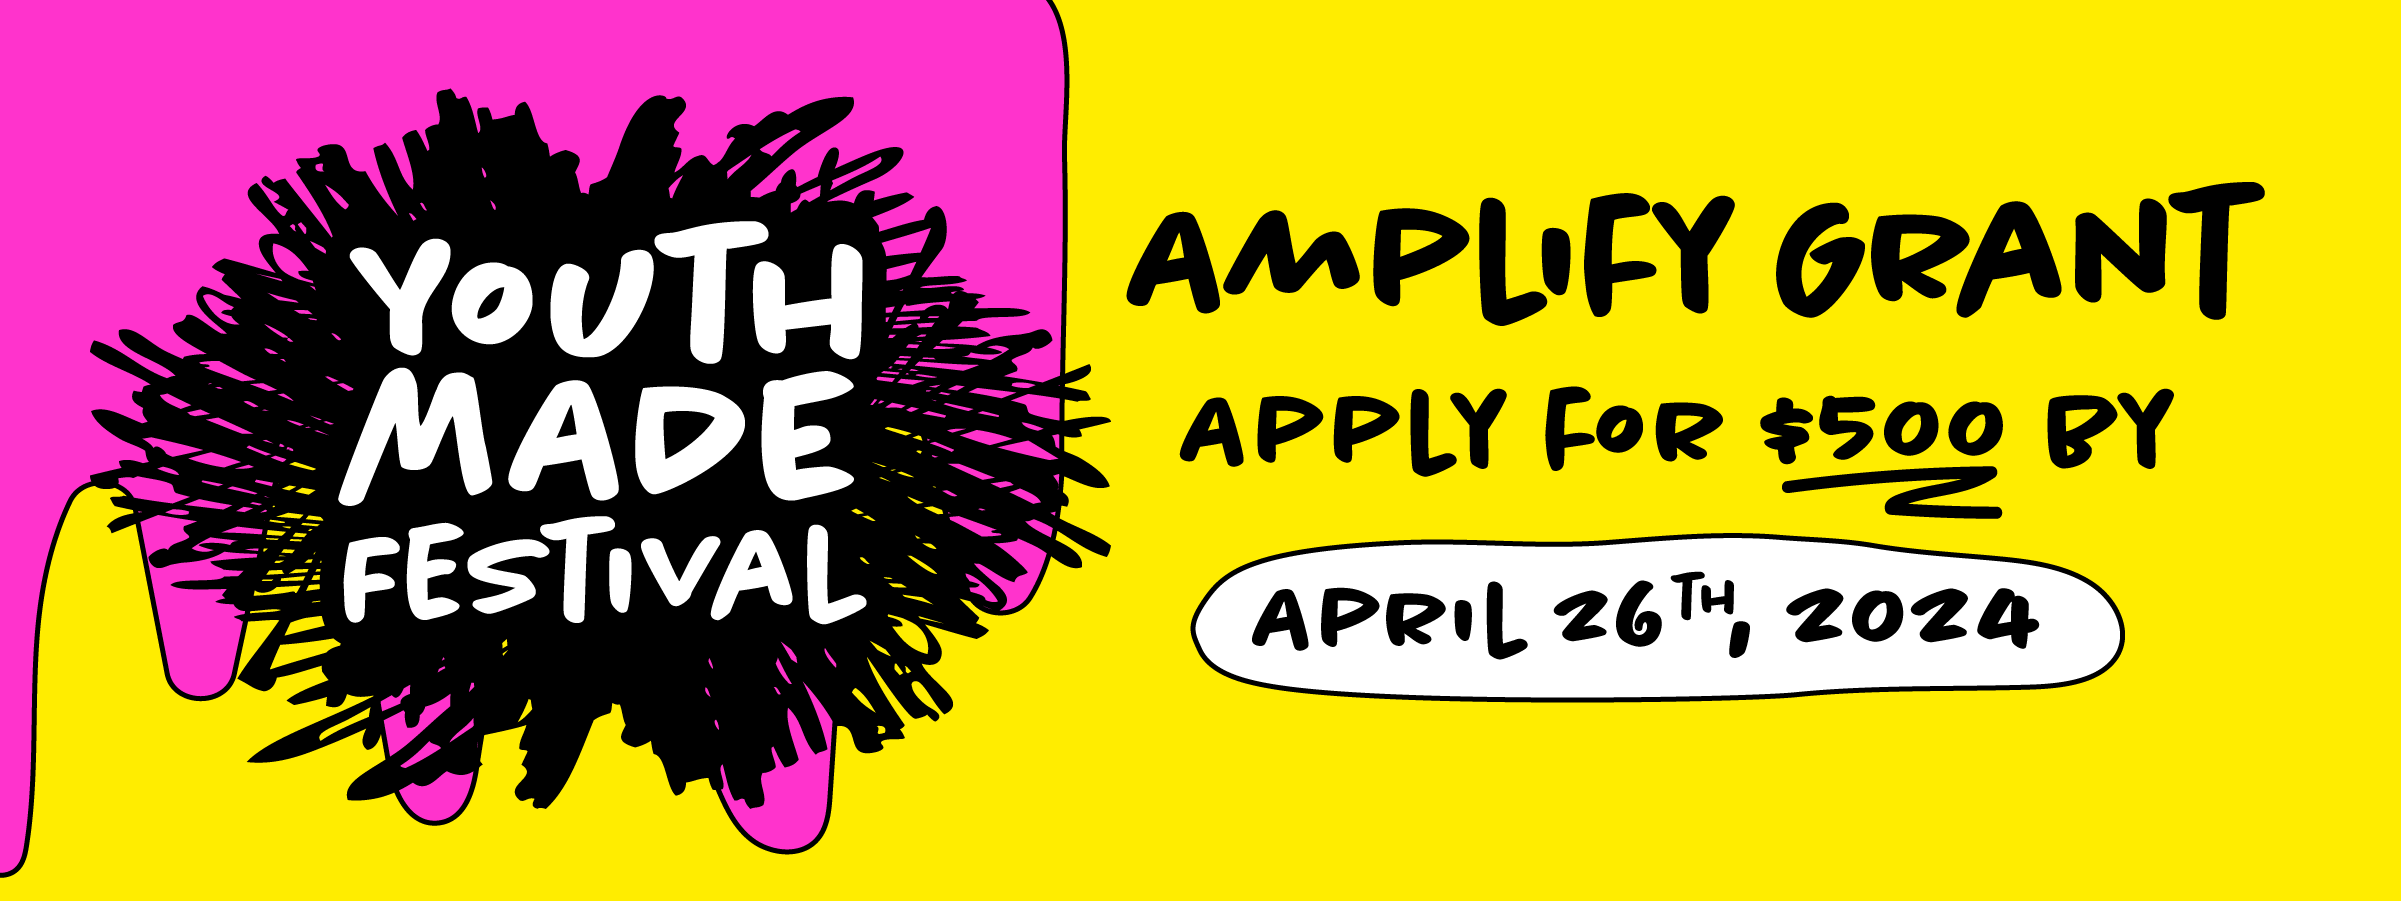 YouthMADE Festival Amplify Grant